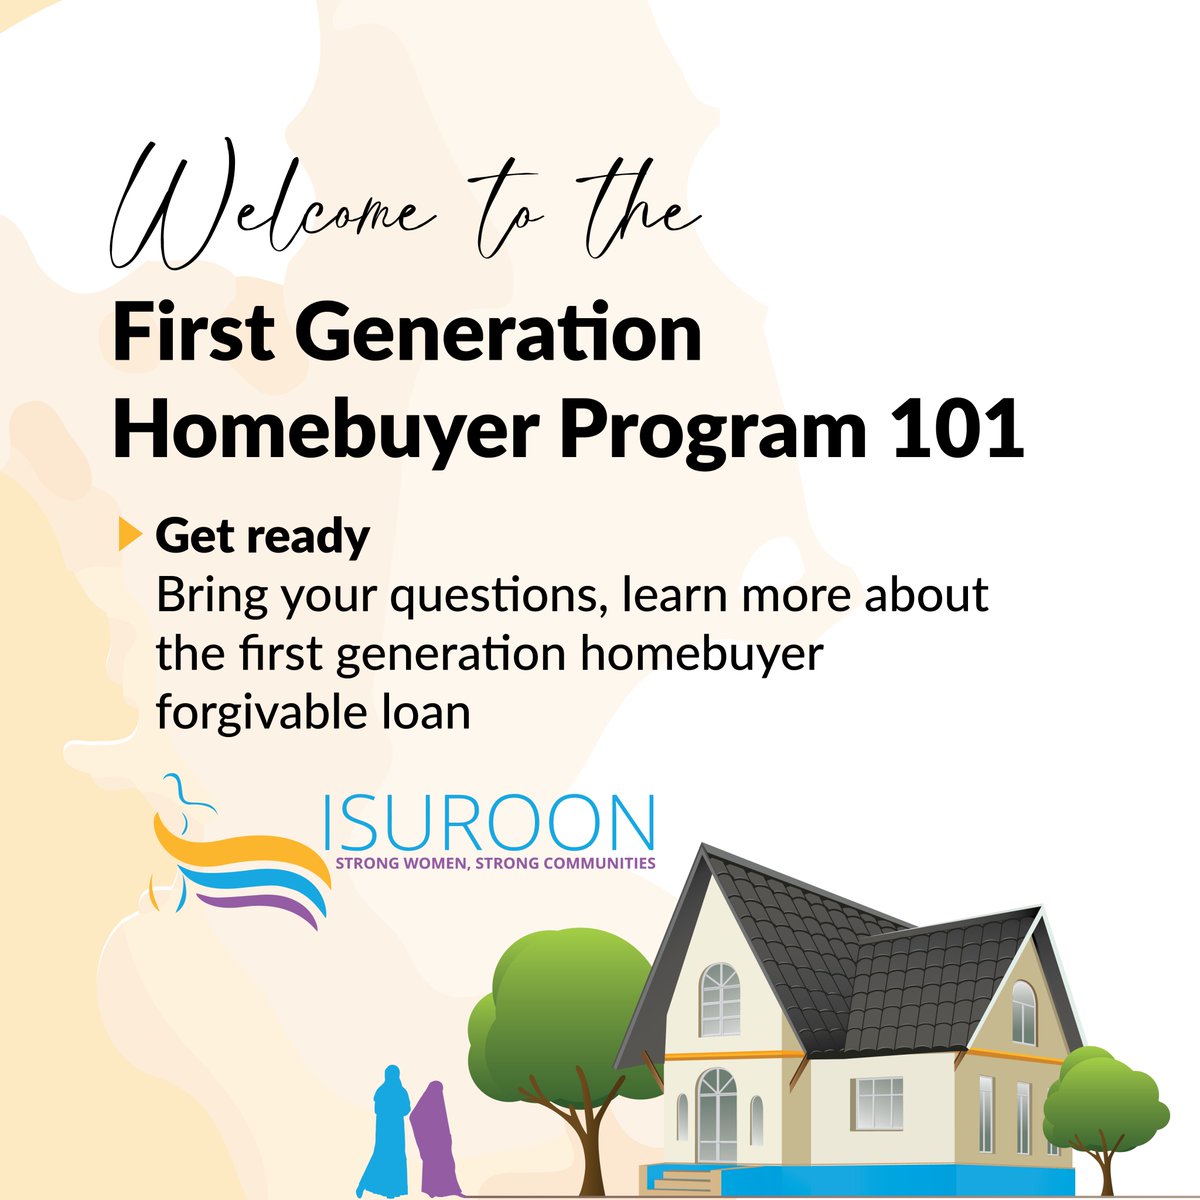 Bring your questions! learn more about the first-generation homebuyer forgivable loan! Please stay tuned for more information regarding date and time! #FirstGeneration #Homebuyer